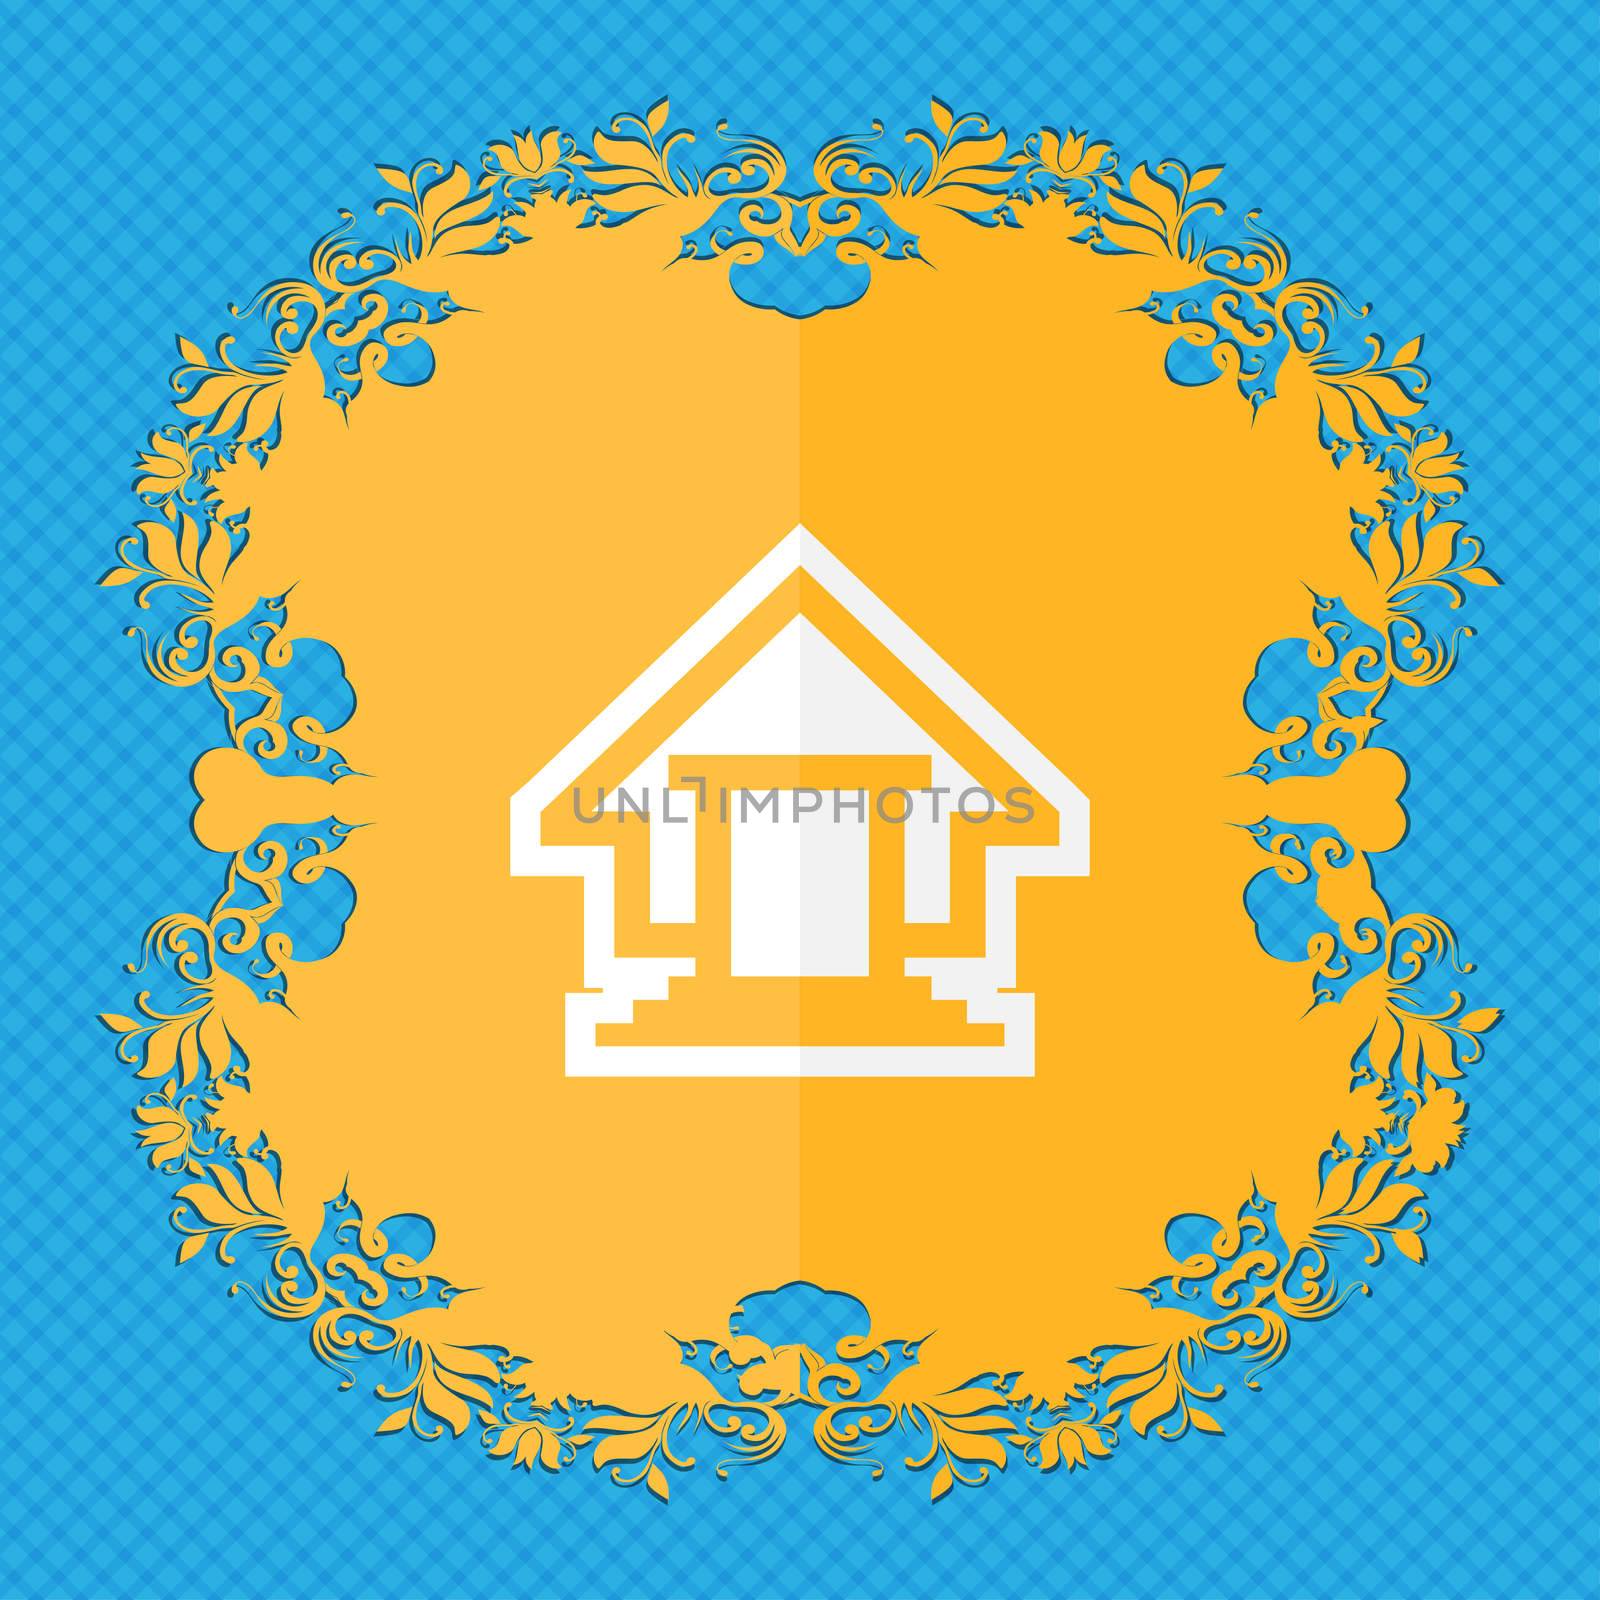 House. Floral flat design on a blue abstract background with place for your text. illustration